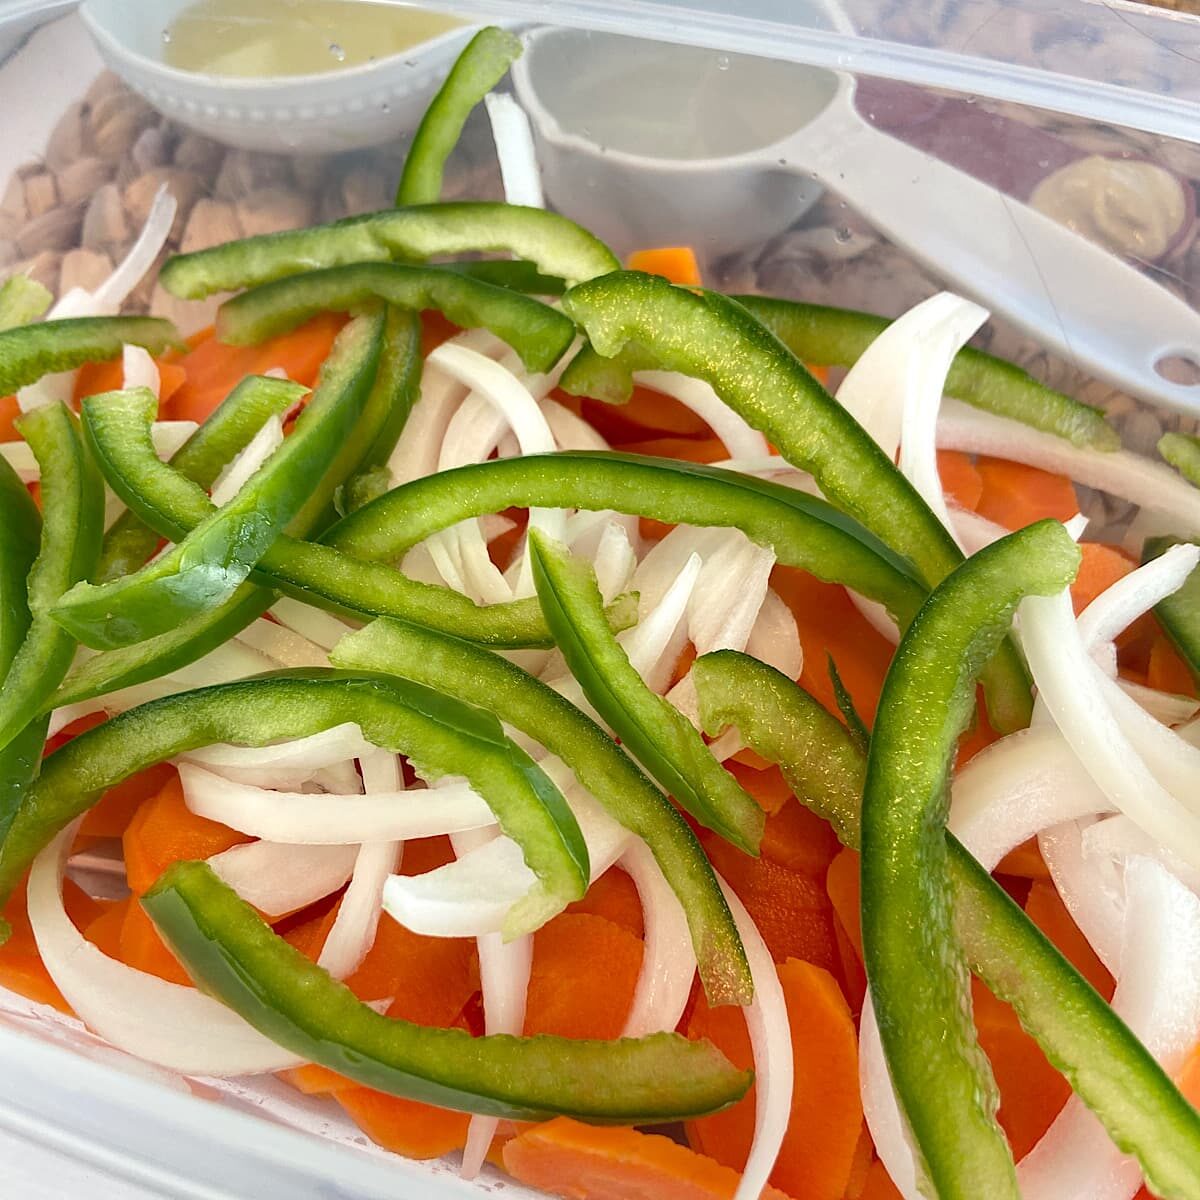 sliced green pepper, onion, and carrots in a container